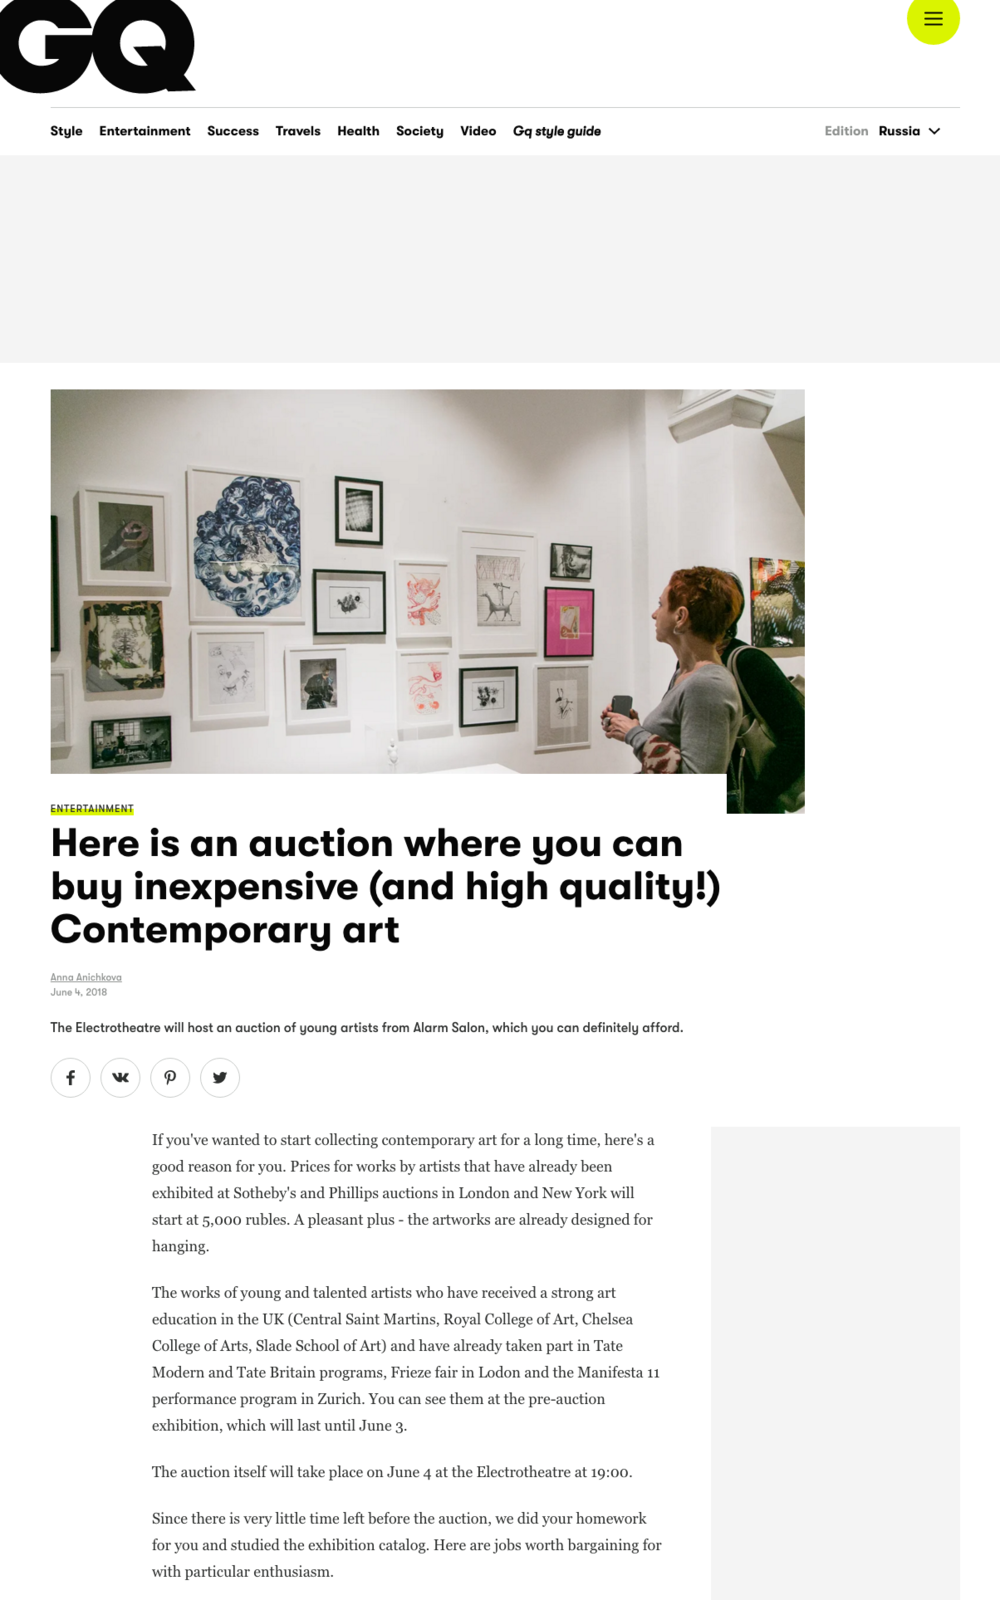 Alarm Salon contemporary art auction to be held at Electrotheatre - GQ Russia.png